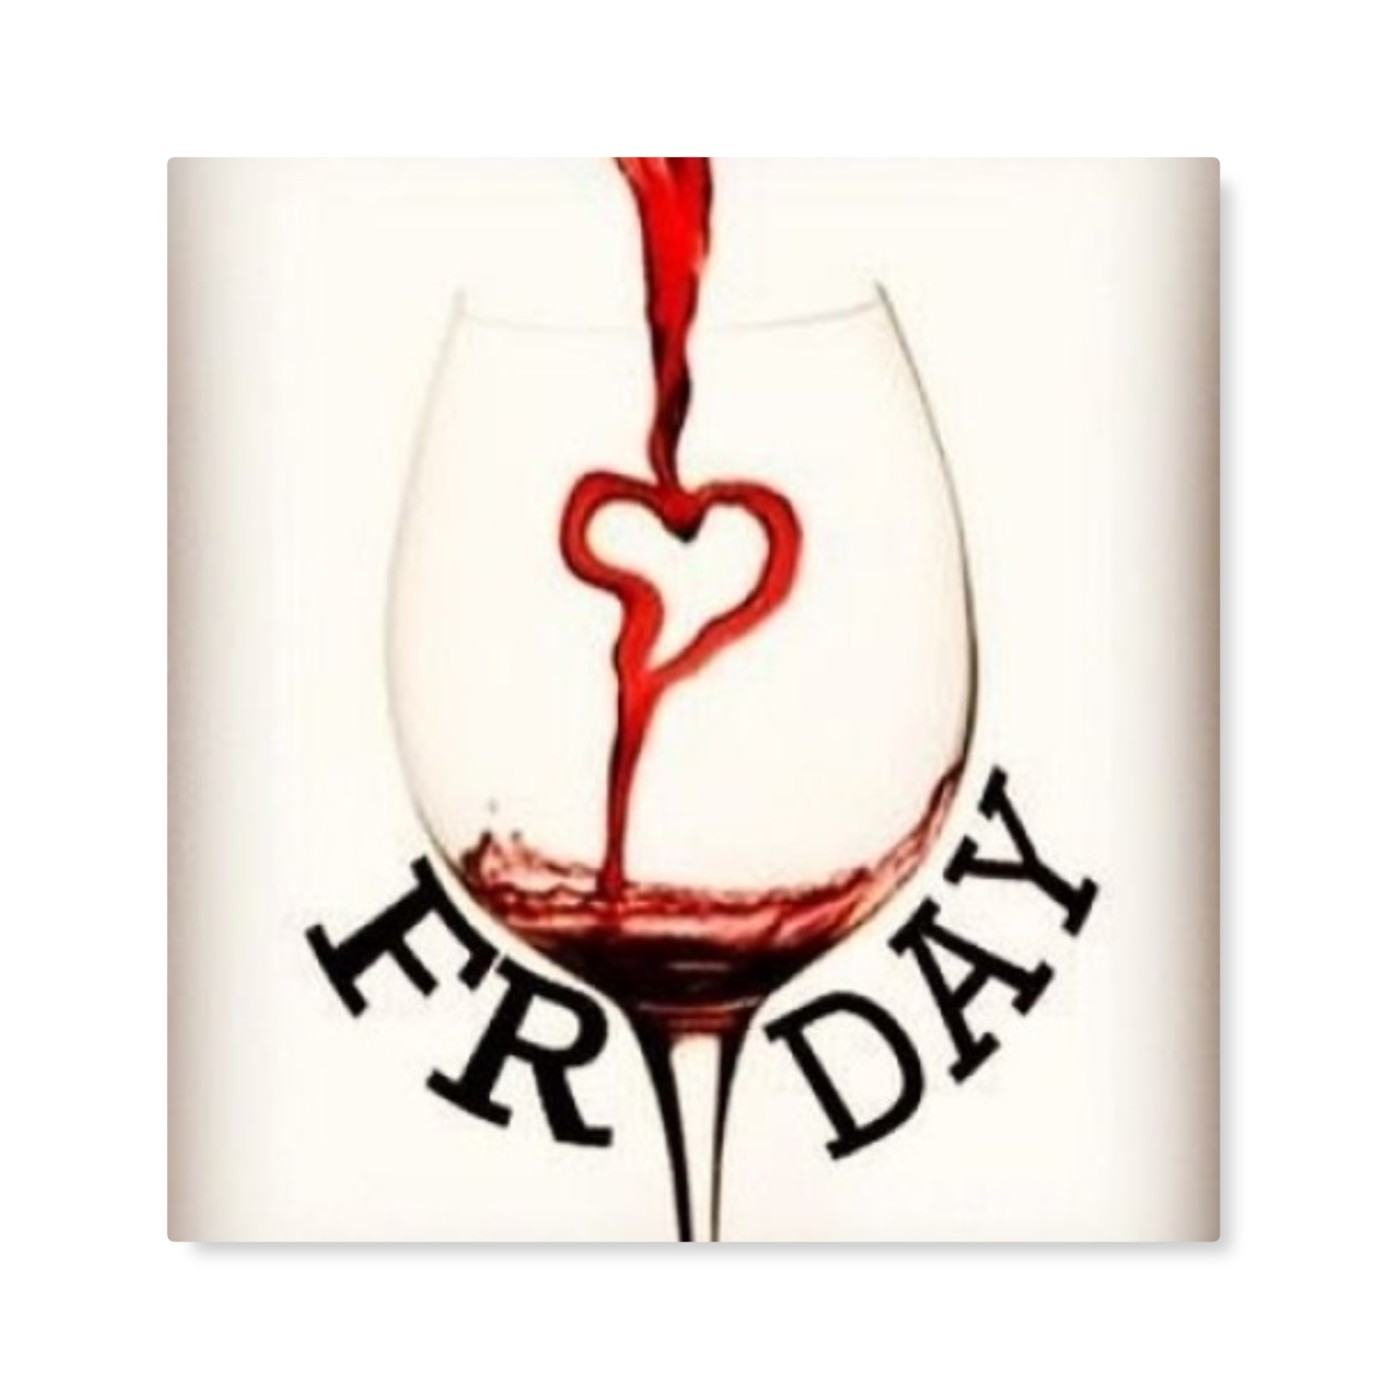 6/7: It's Red Wine Friday and we have LOTS to cover today on BrunoNati...